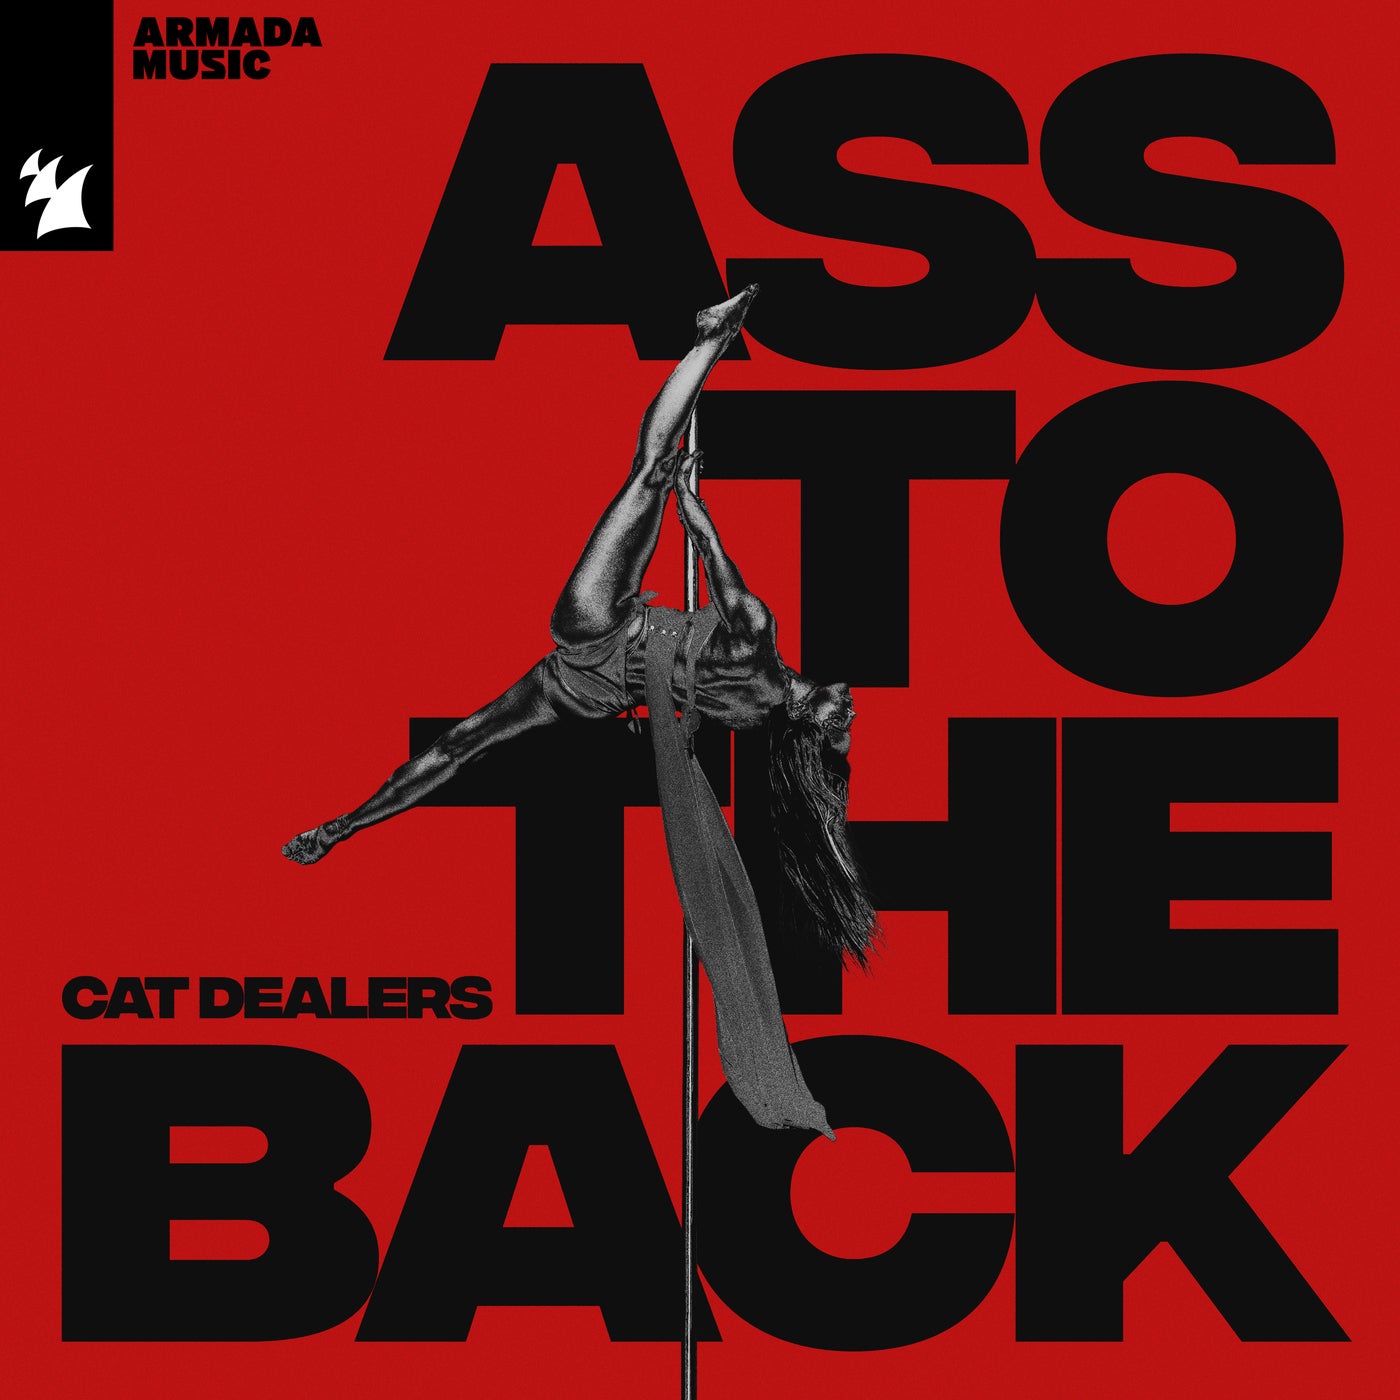 image cover: Cat Dealers - Ass To The Back on Armada Music